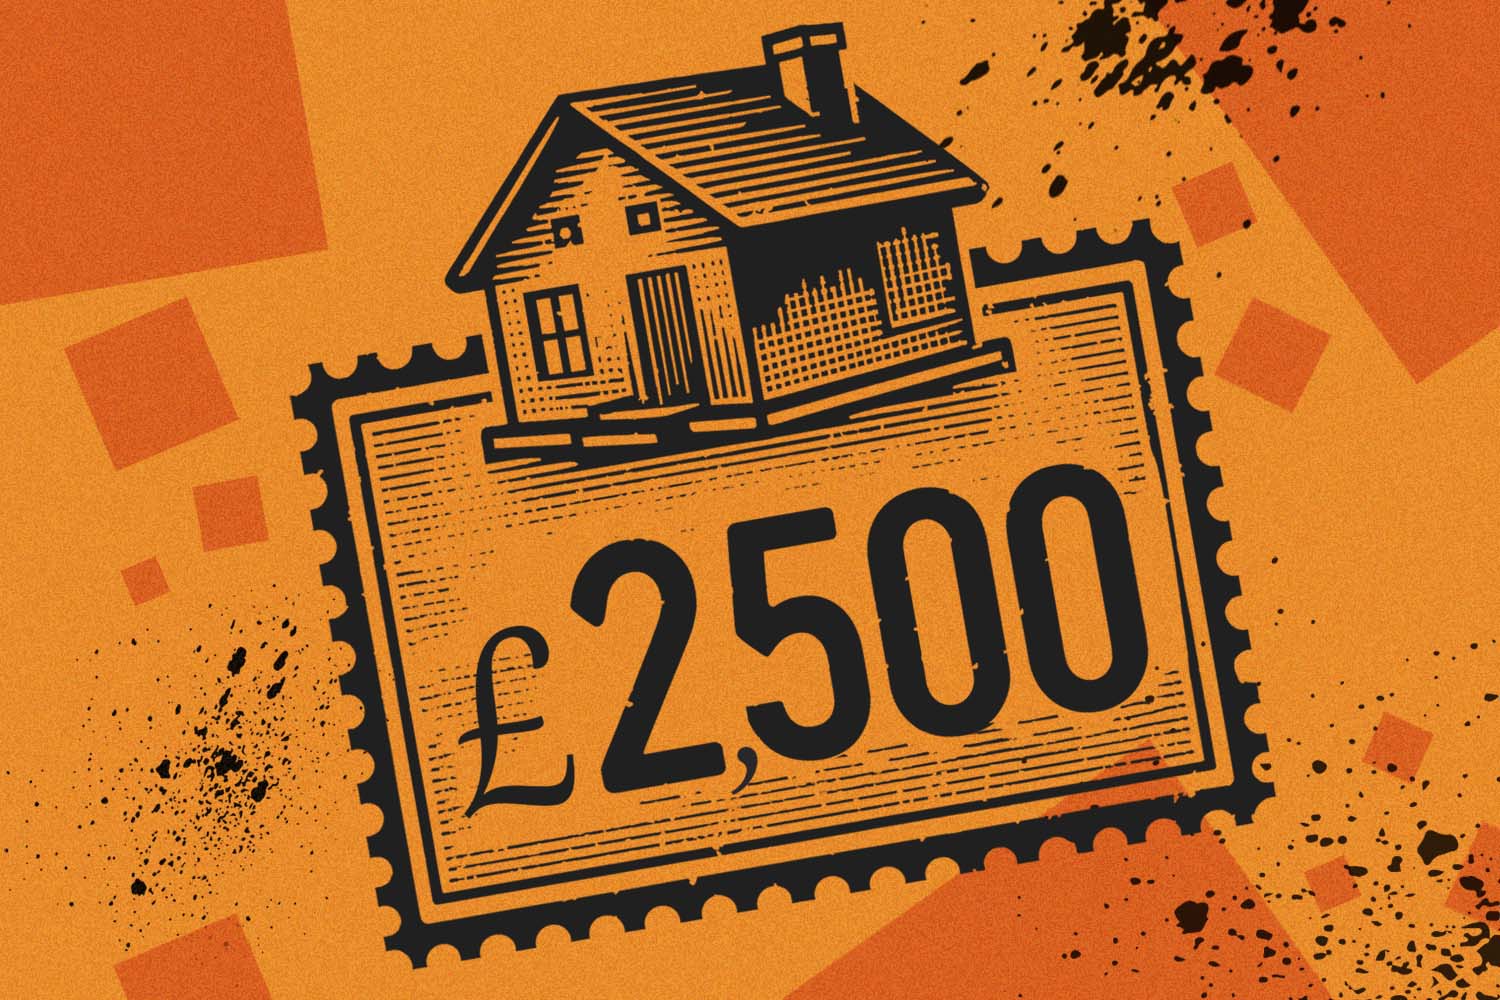 Stamp duty could be cut, but it may not be worth waiting for